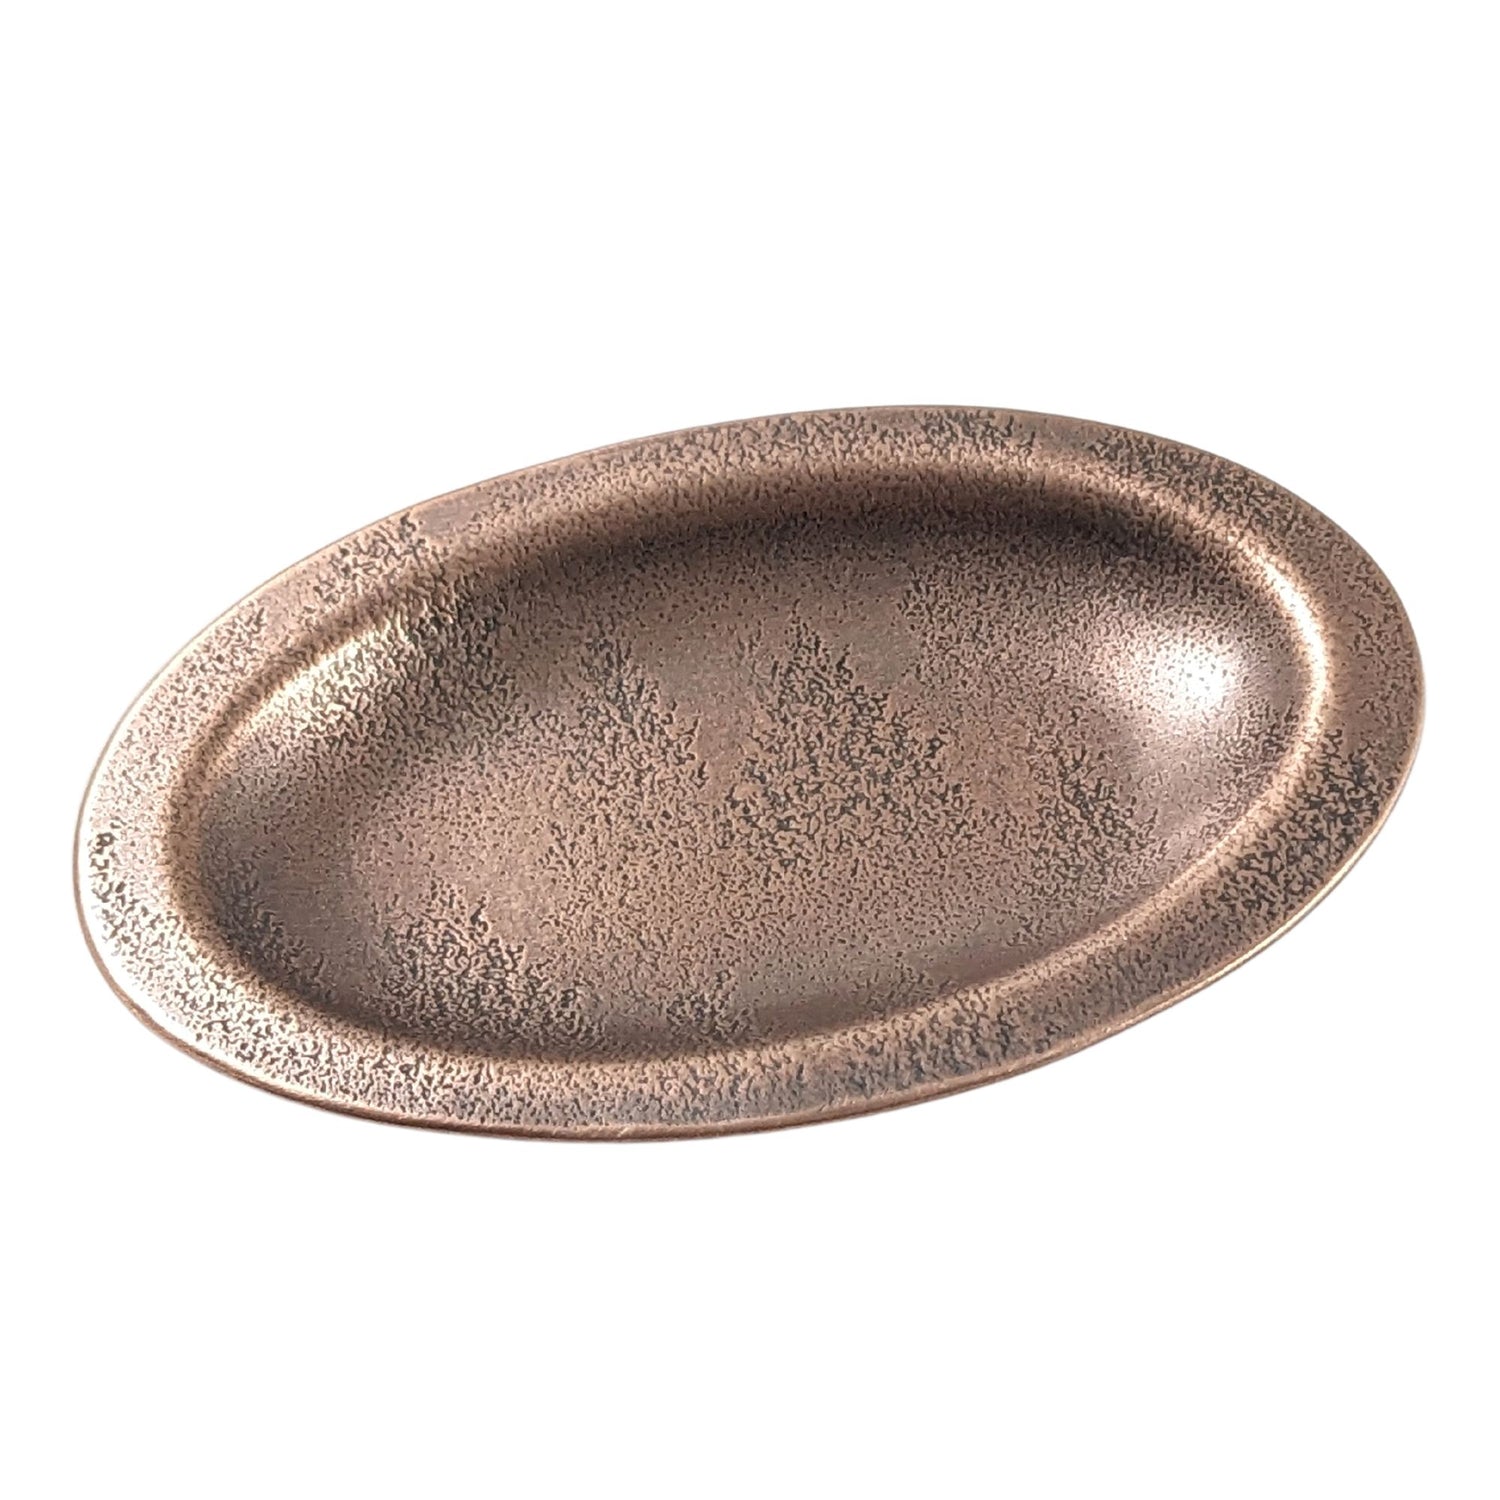 An oval copper ring dish with a raised edge. The dish has an impressed